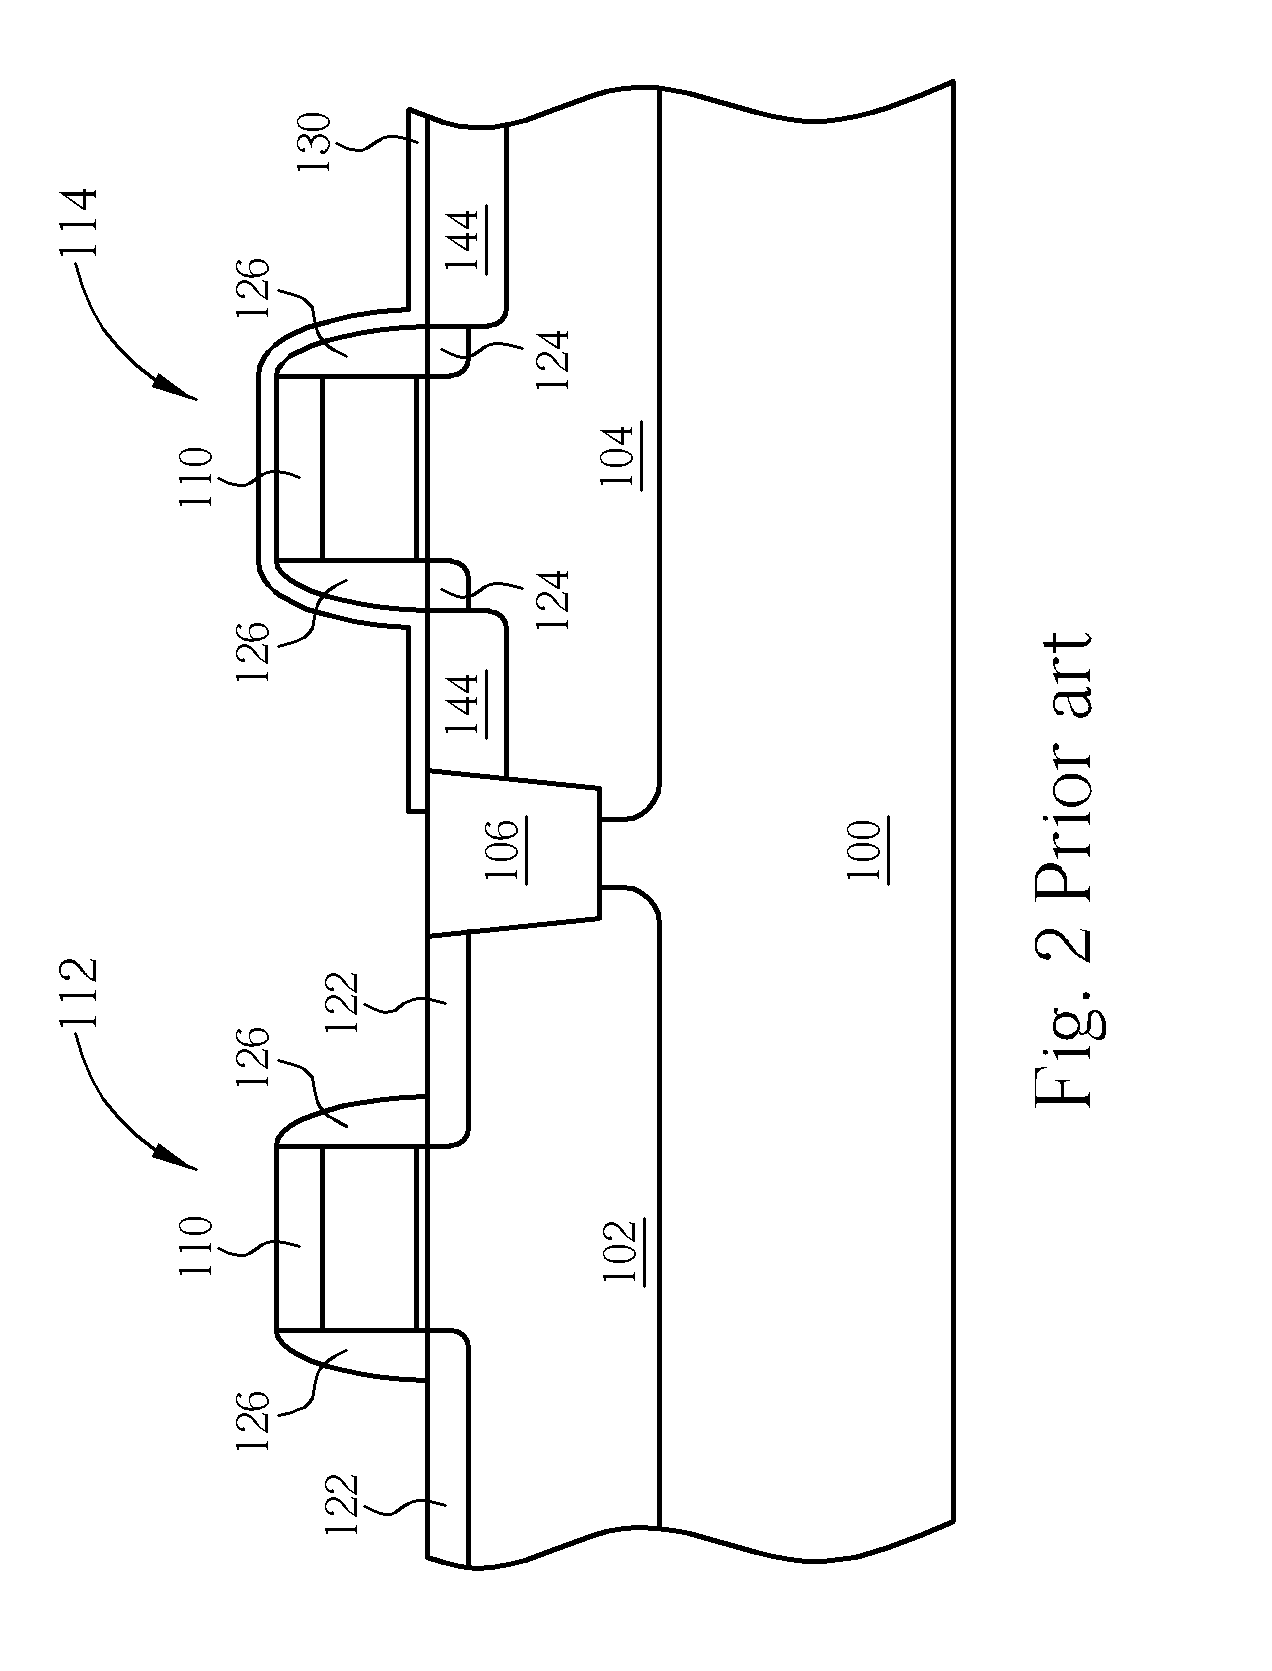 Method of manufacturing complementary metal oxide semiconductor transistors